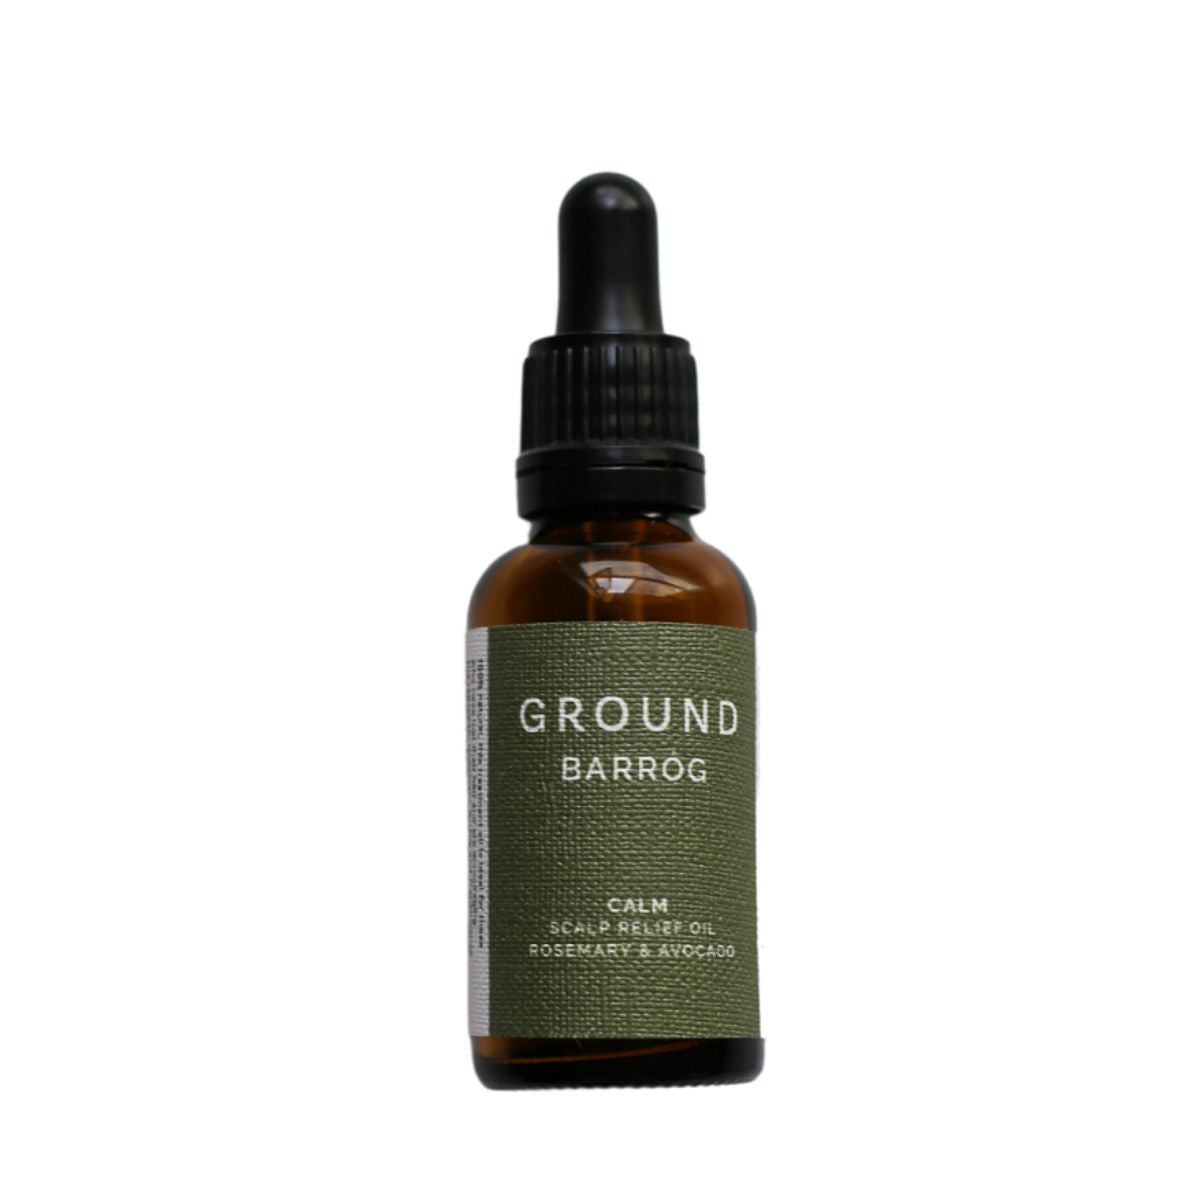 GROUND BARRÓG Calm Scalp Relief Oil (Cancer Care Products)